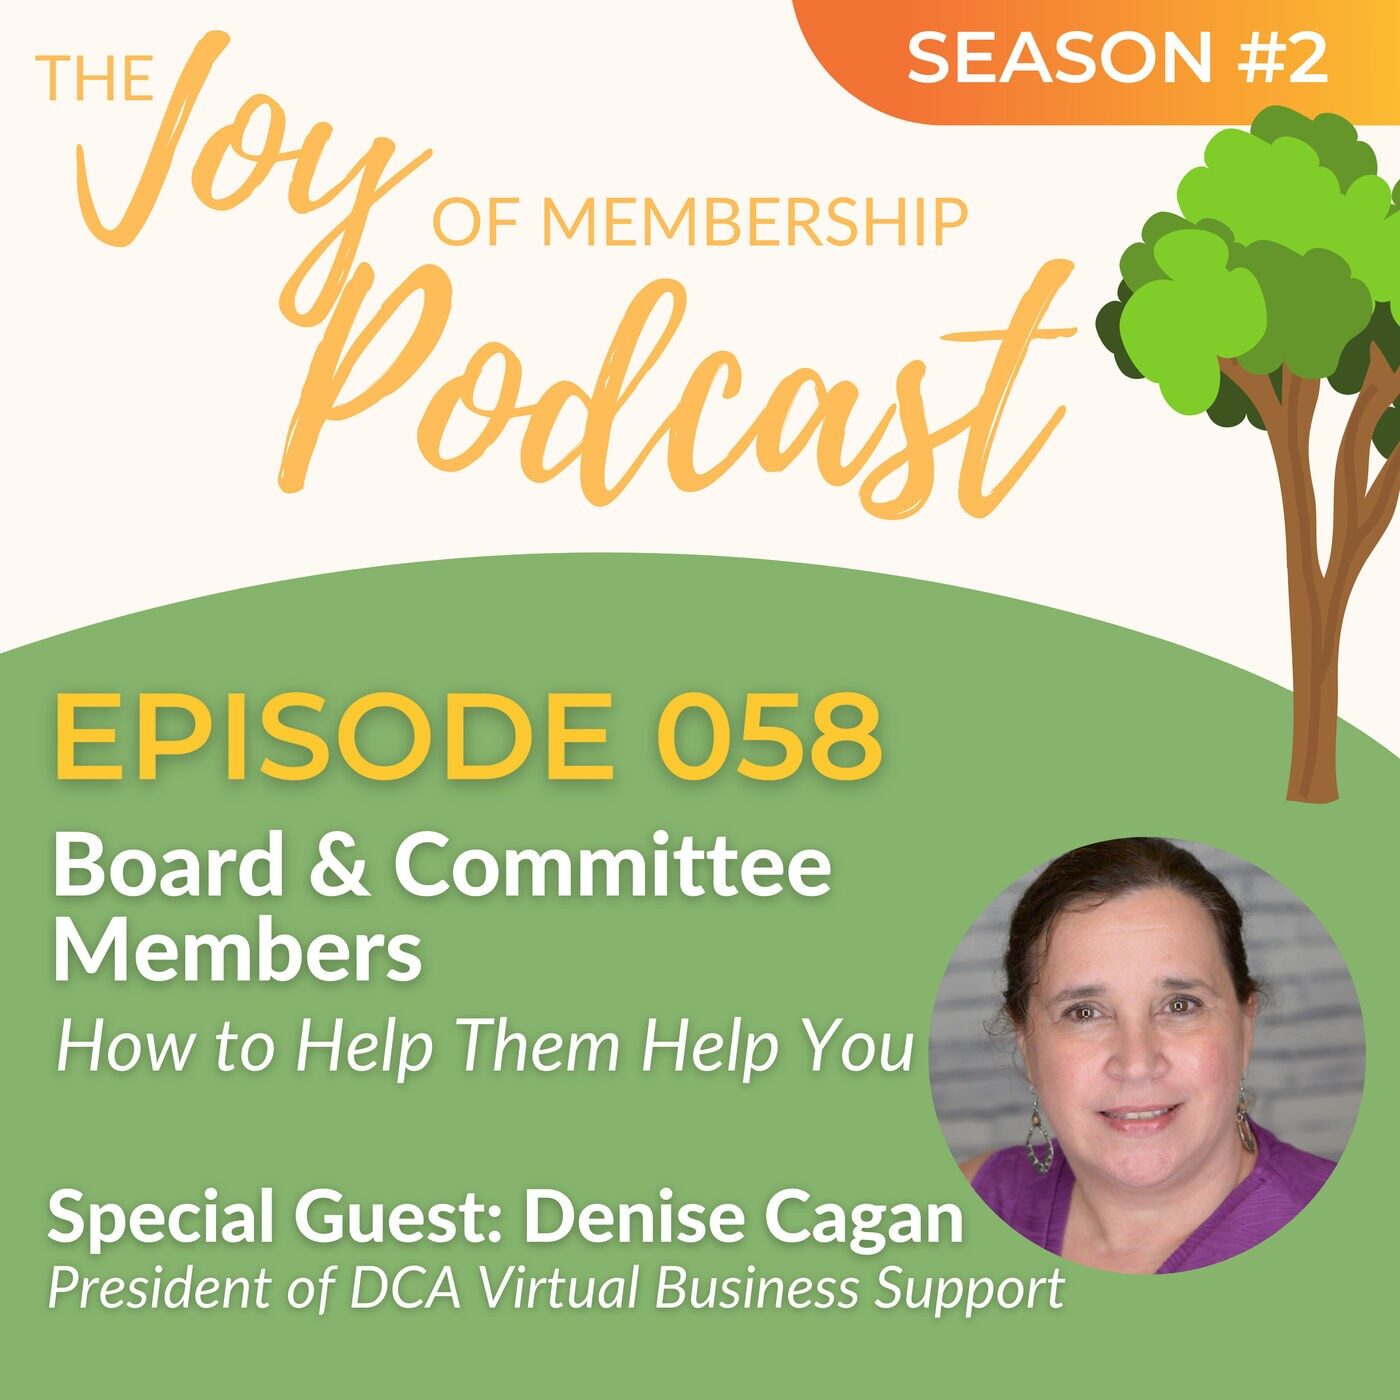 The Joy of Membership Podcast Season 2, Episode 58: Board and Committee Members - How to Help Them Help You. Special Guest Denise Cagan, President of DCA Virtual Business Support. Media